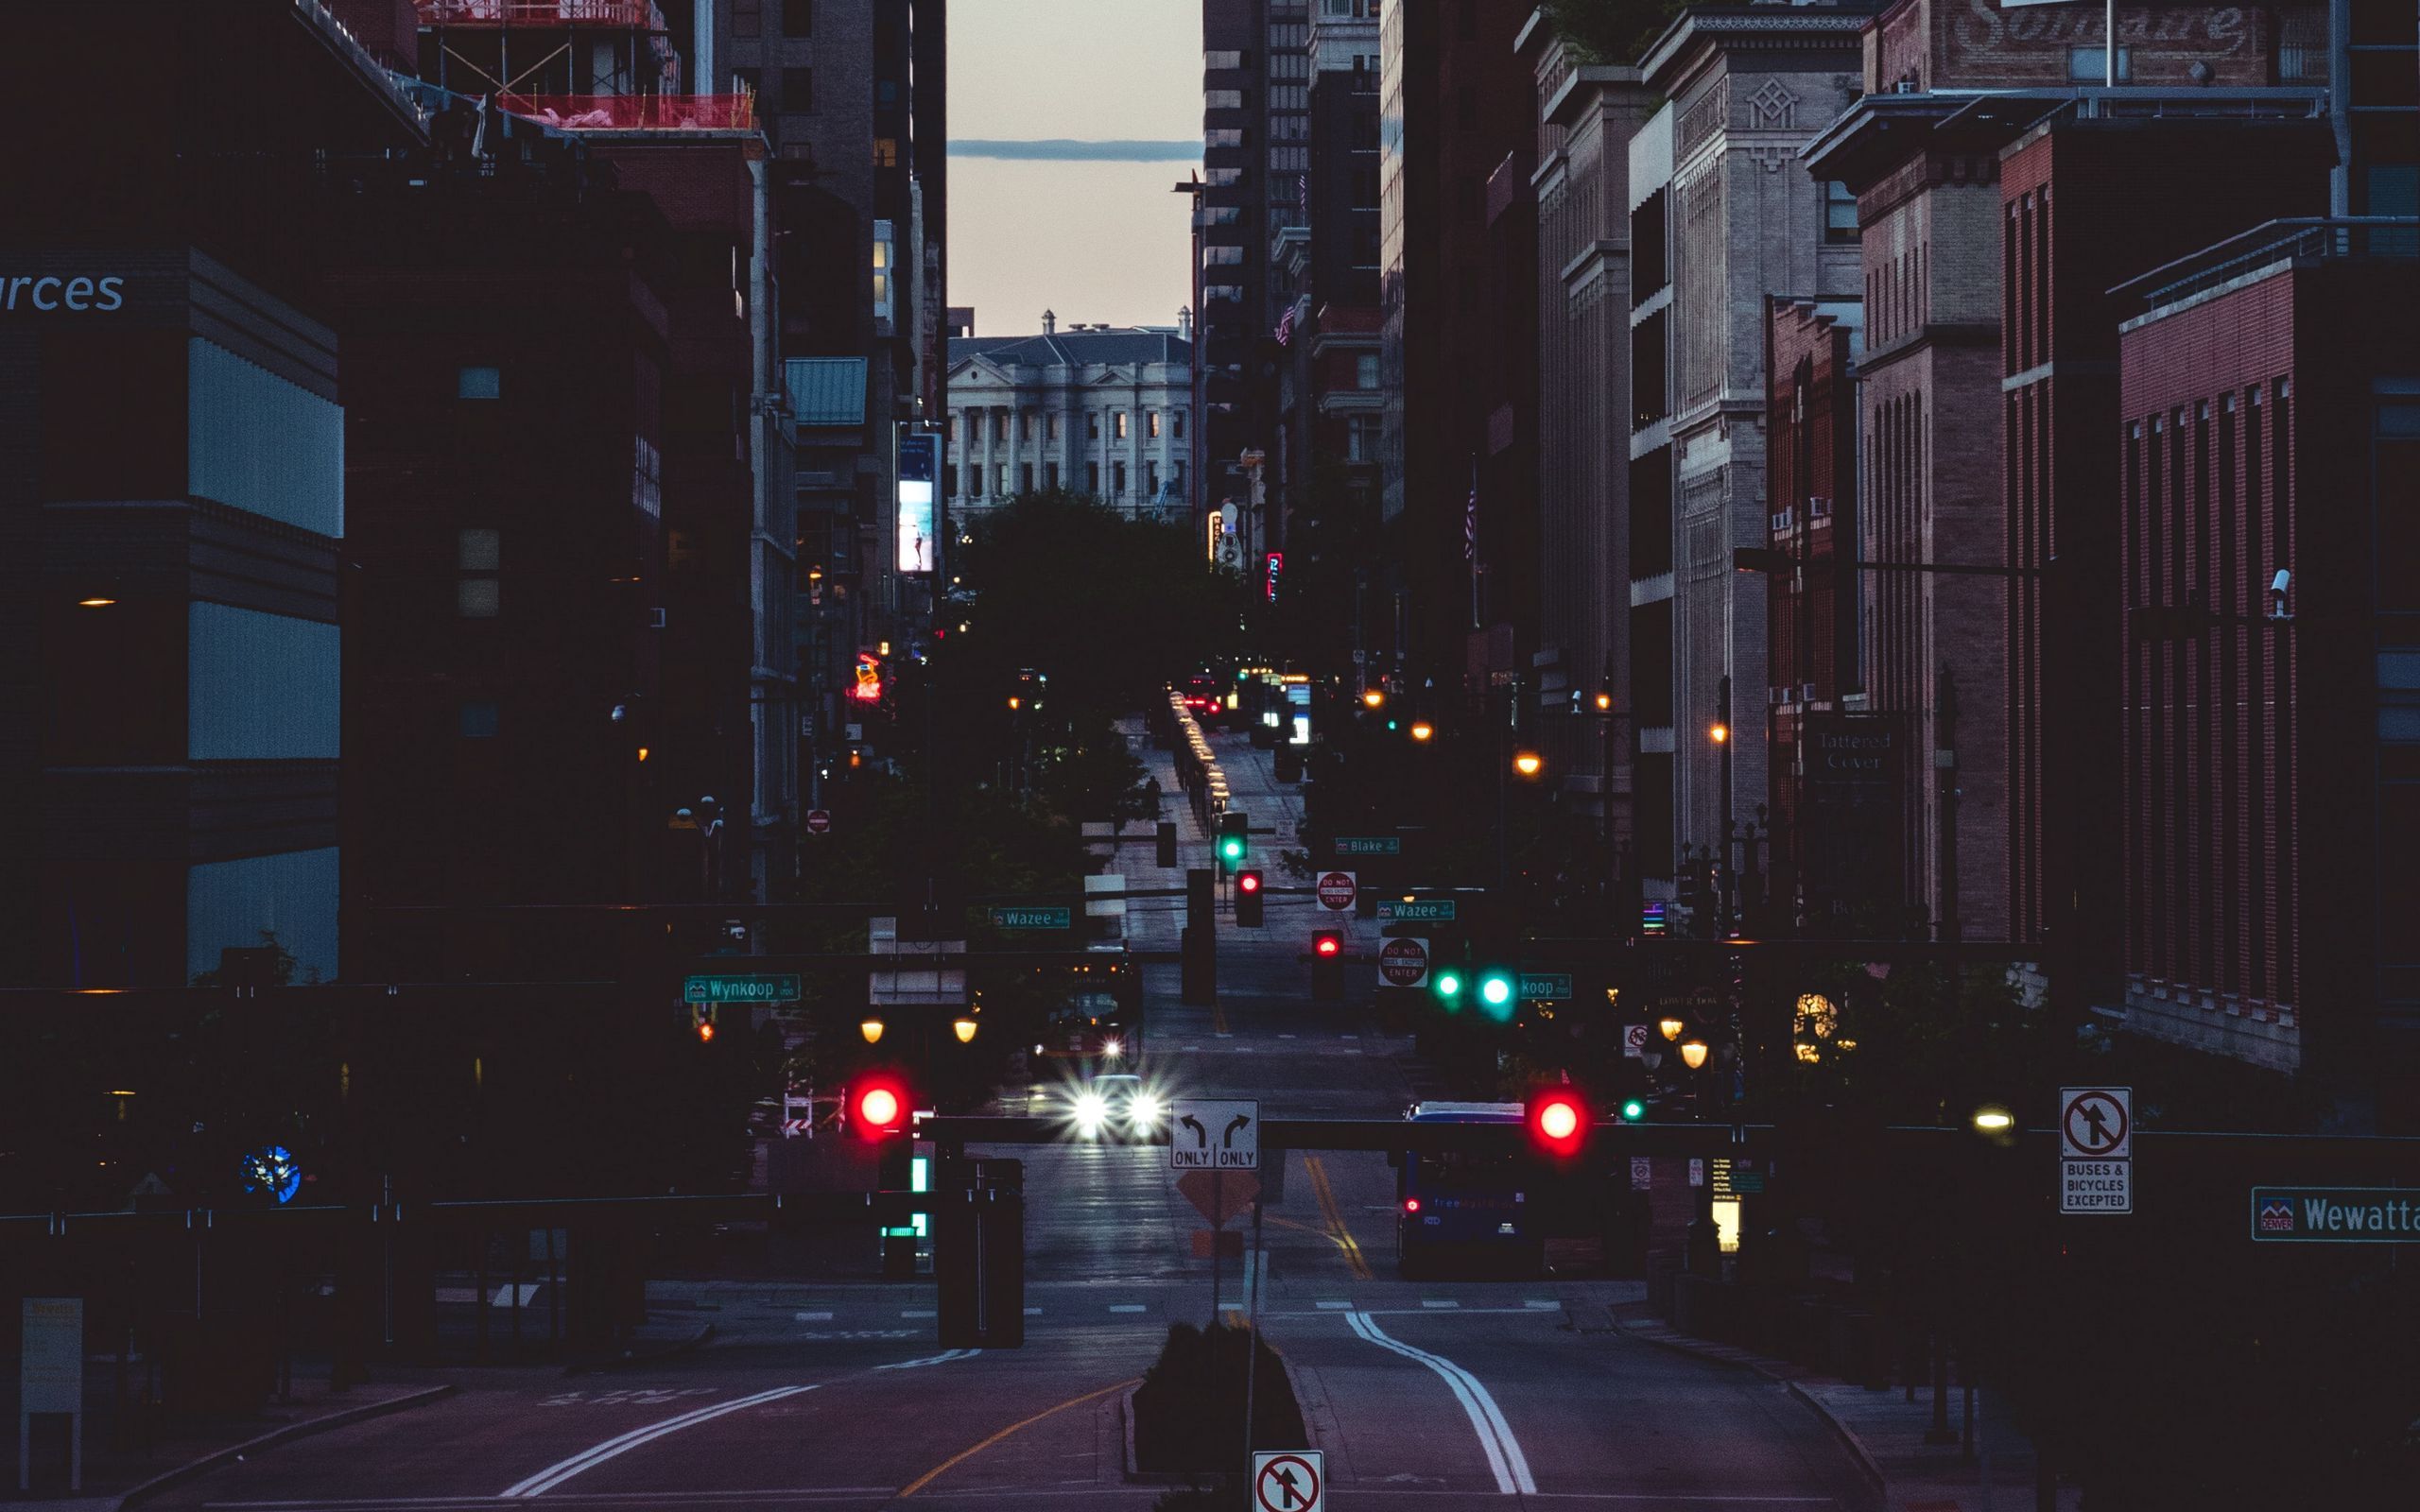 A street in the city at night with traffic lights and street signs. - 2560x1600